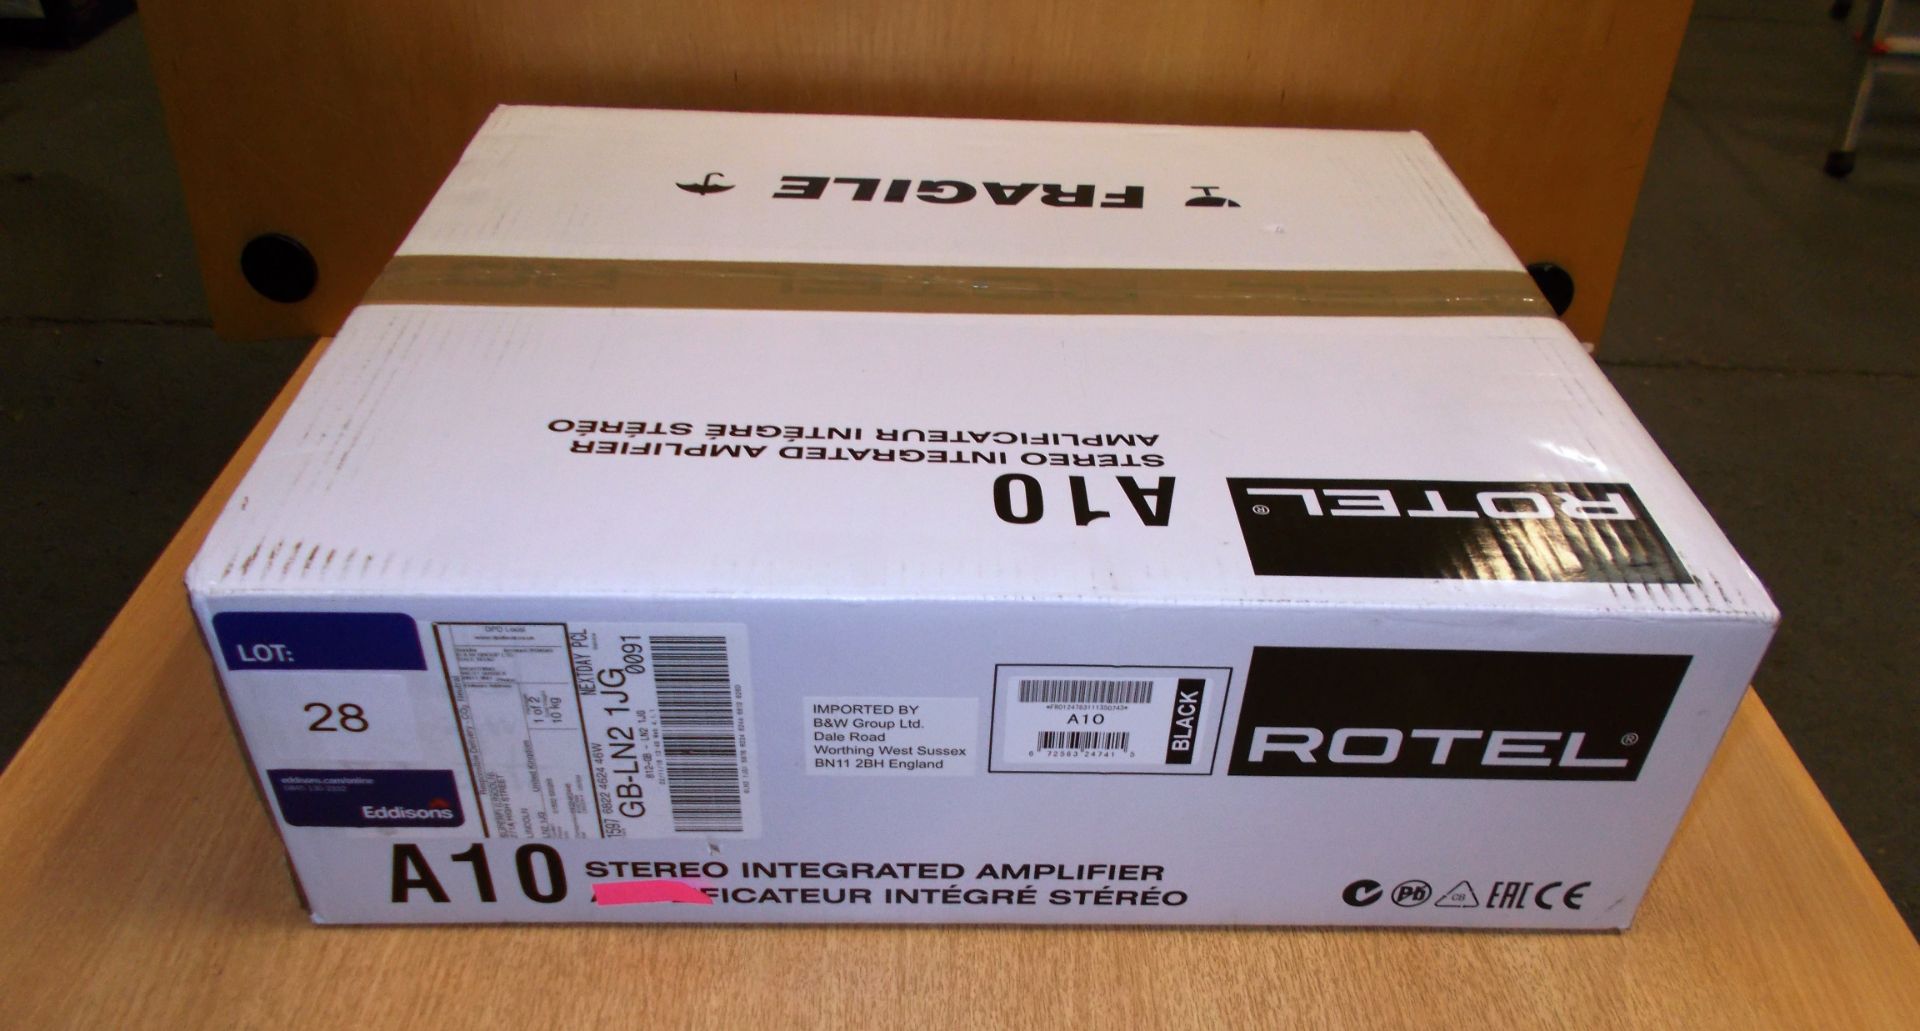 Rotel A10 Stereo Integrated Amplifier (boxed) – RRP £390